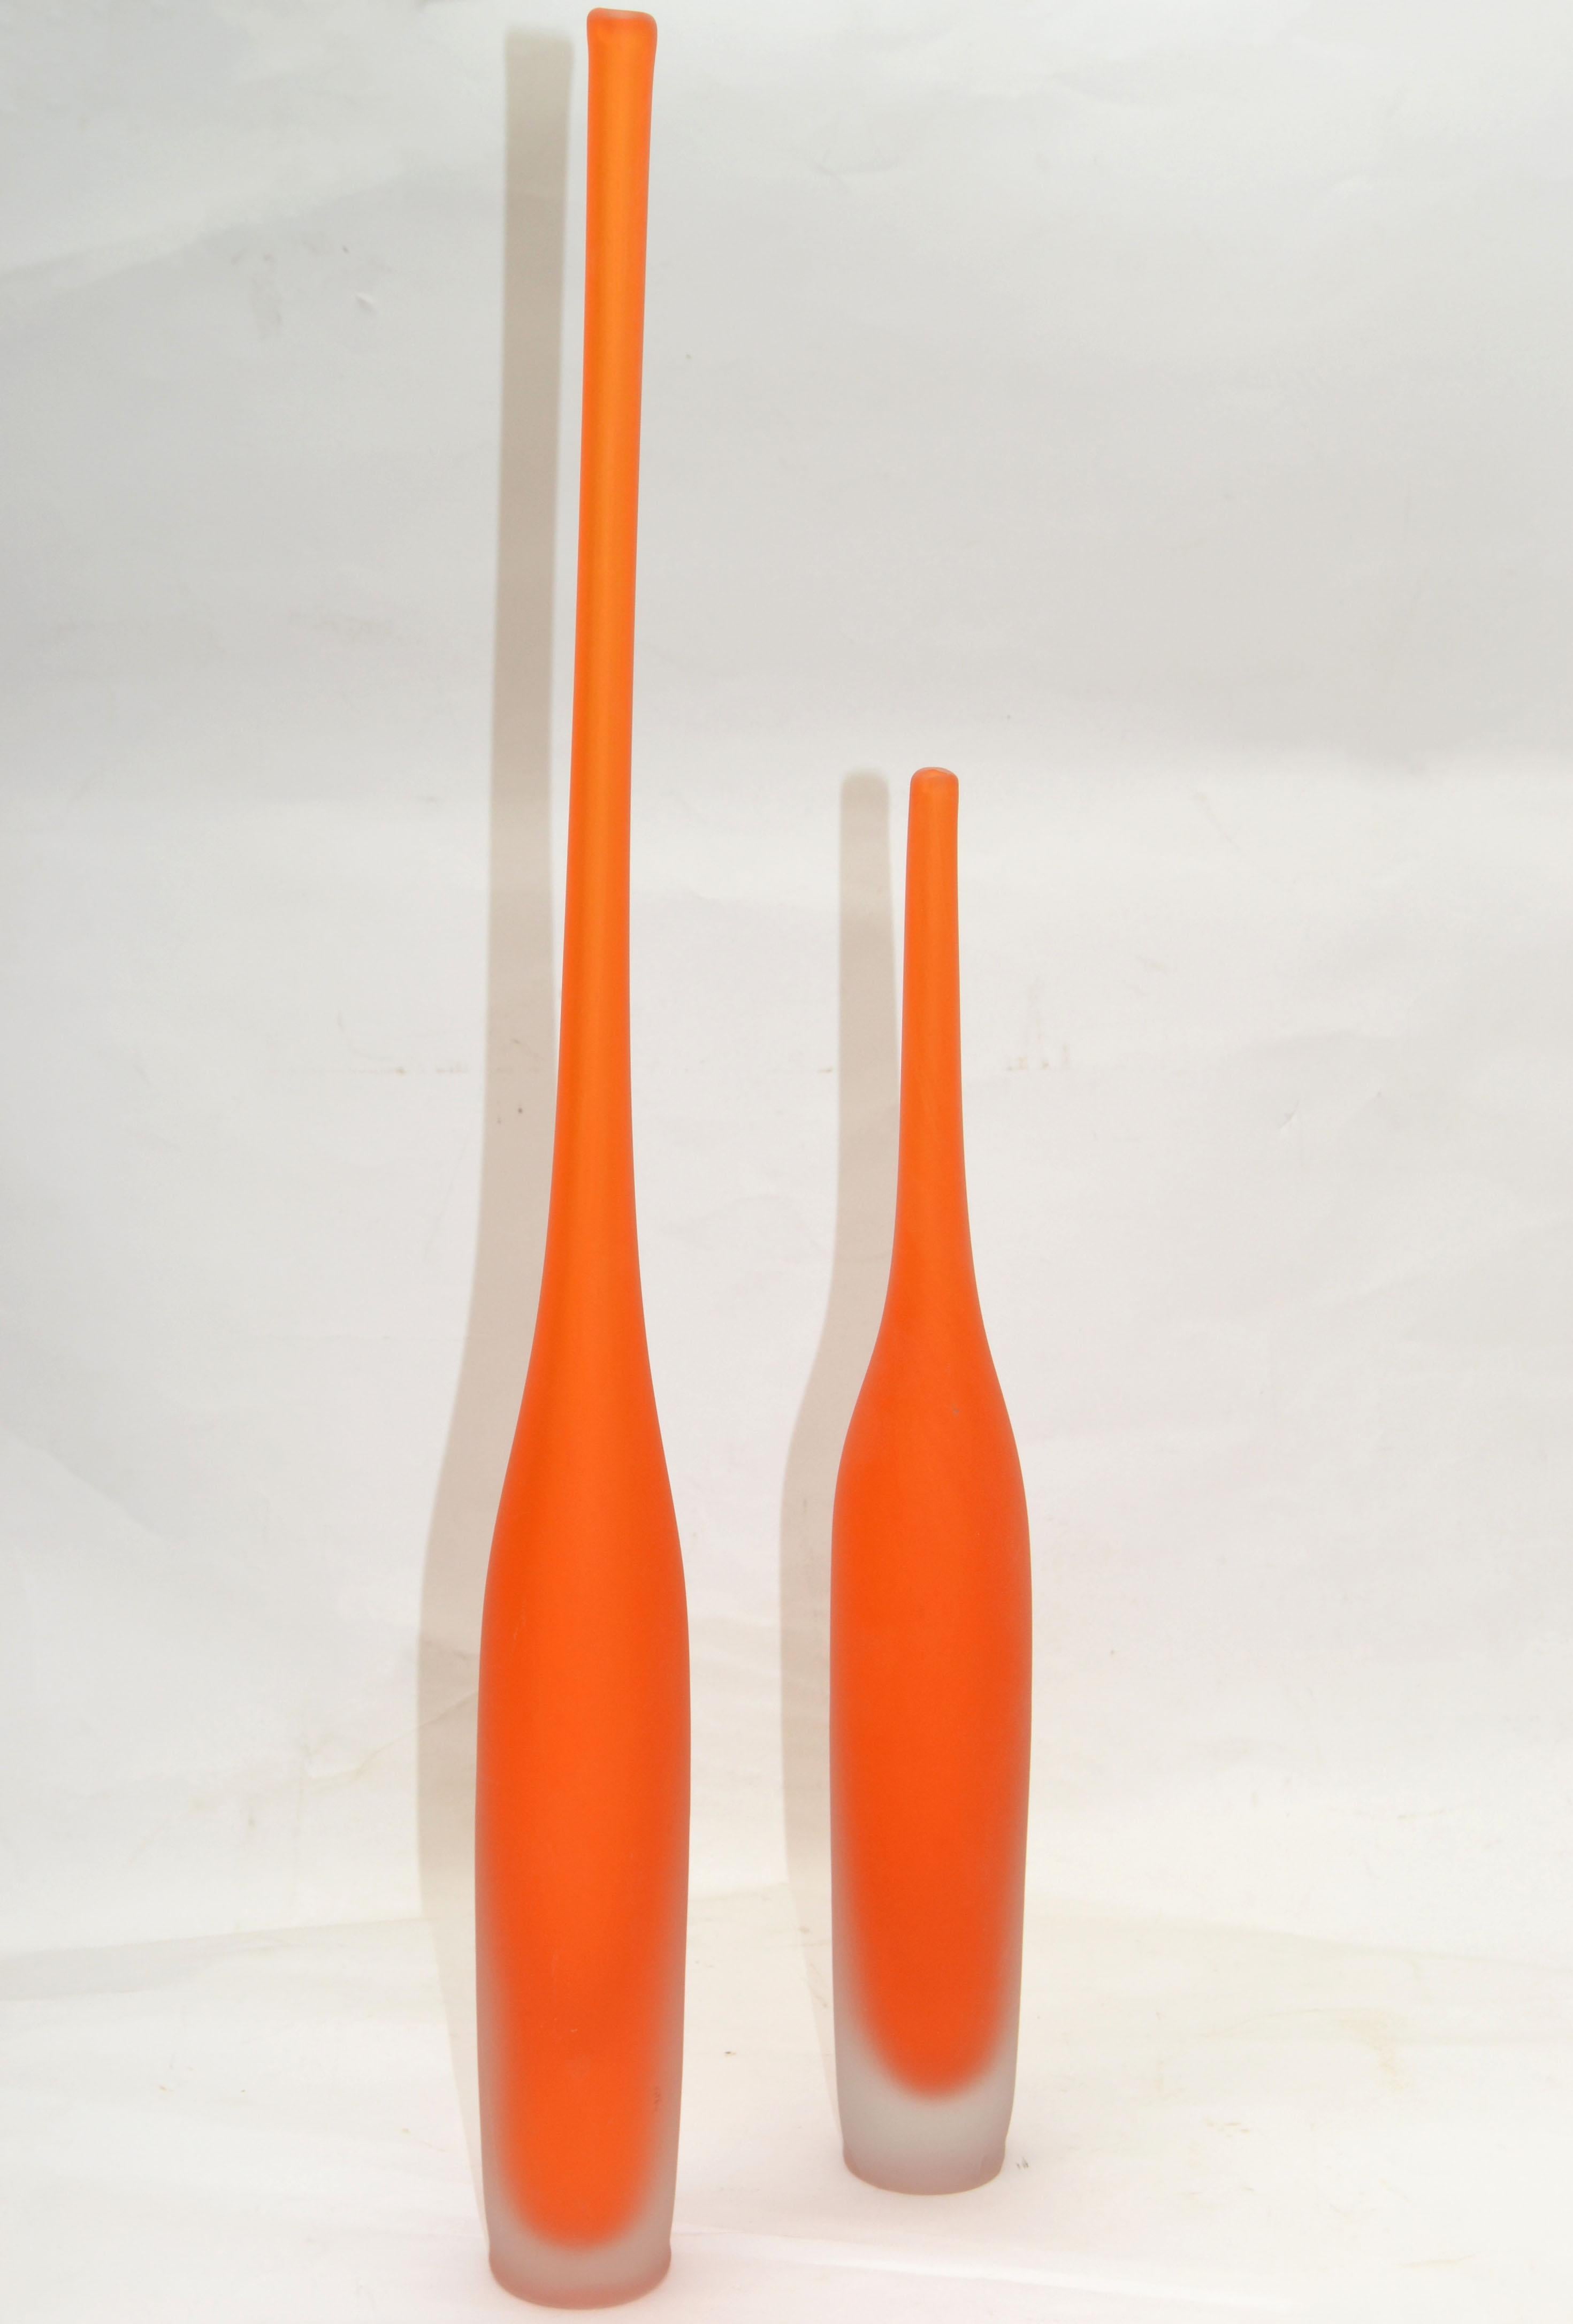 Set of Orange Scavo Glass Murano Art Glass Bud vases, vessel, decanter Mid-Century Modern made in Italy in 1980.
Smaller Vase measures: 16.25 inches Height.